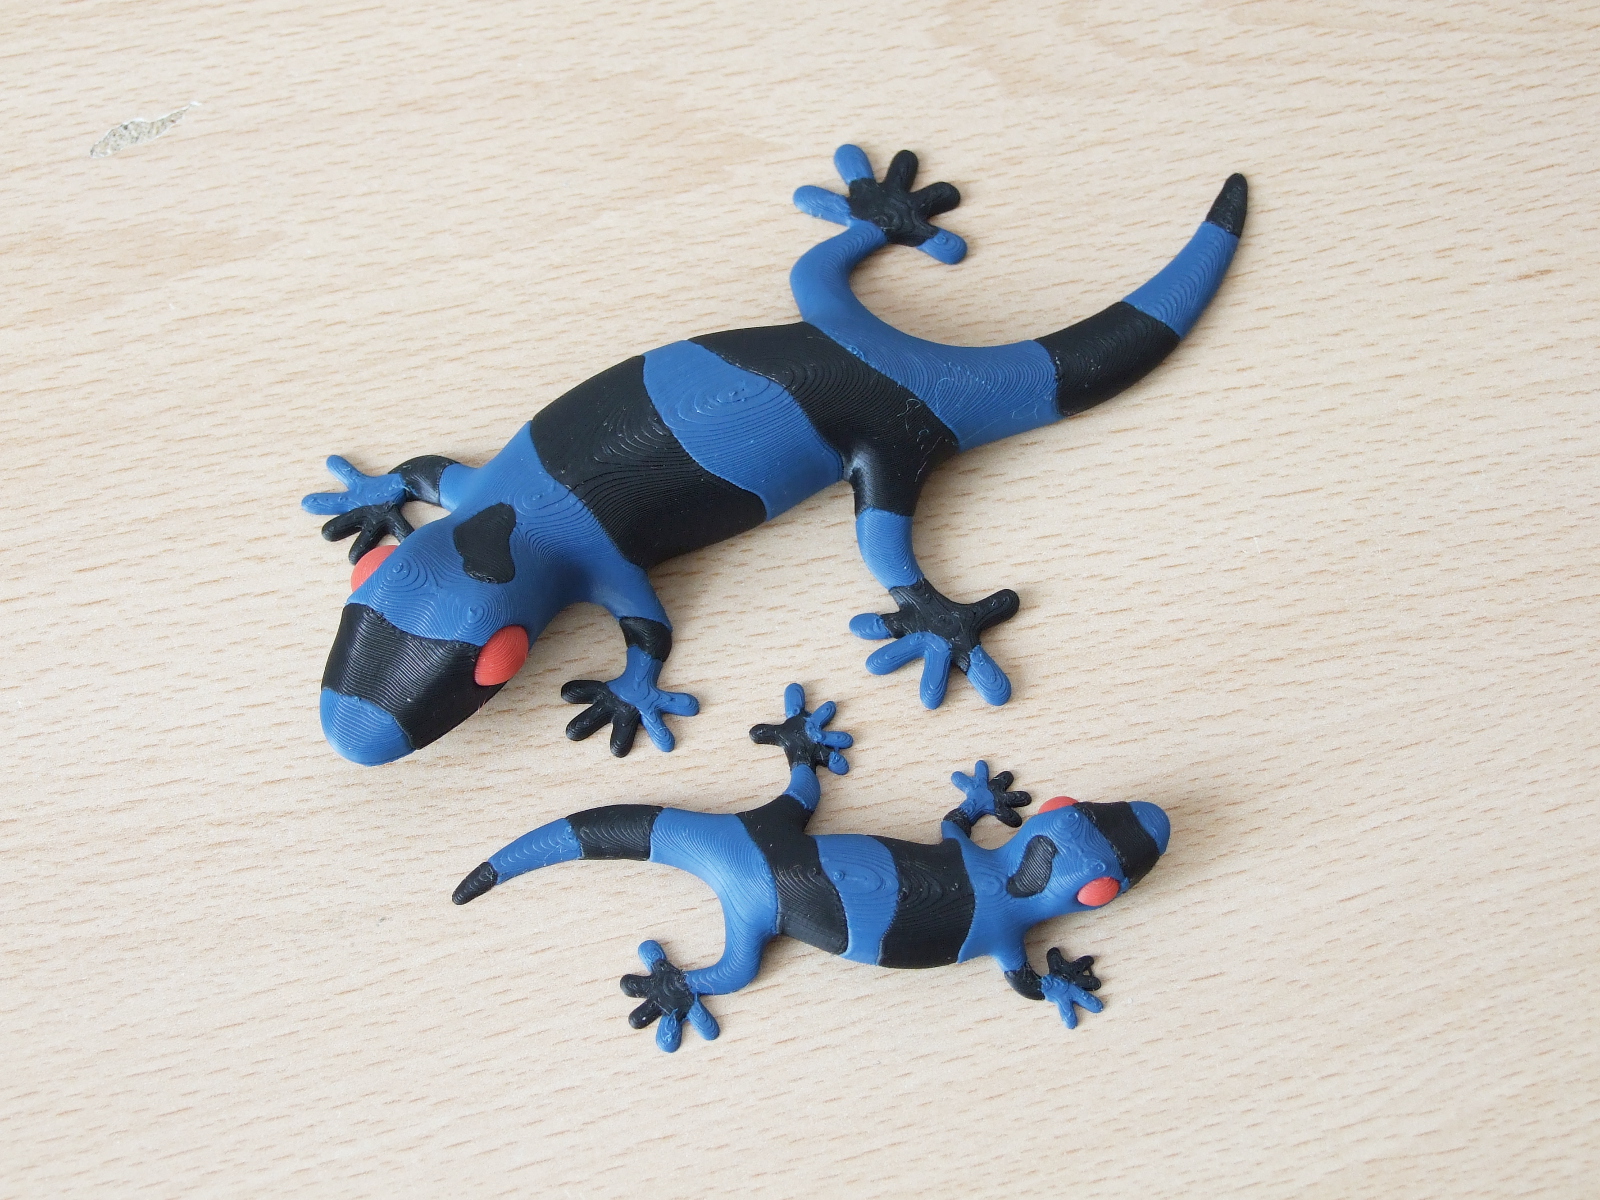 Striped lizard (multi-material) by Prusa Research | Download free STL ...